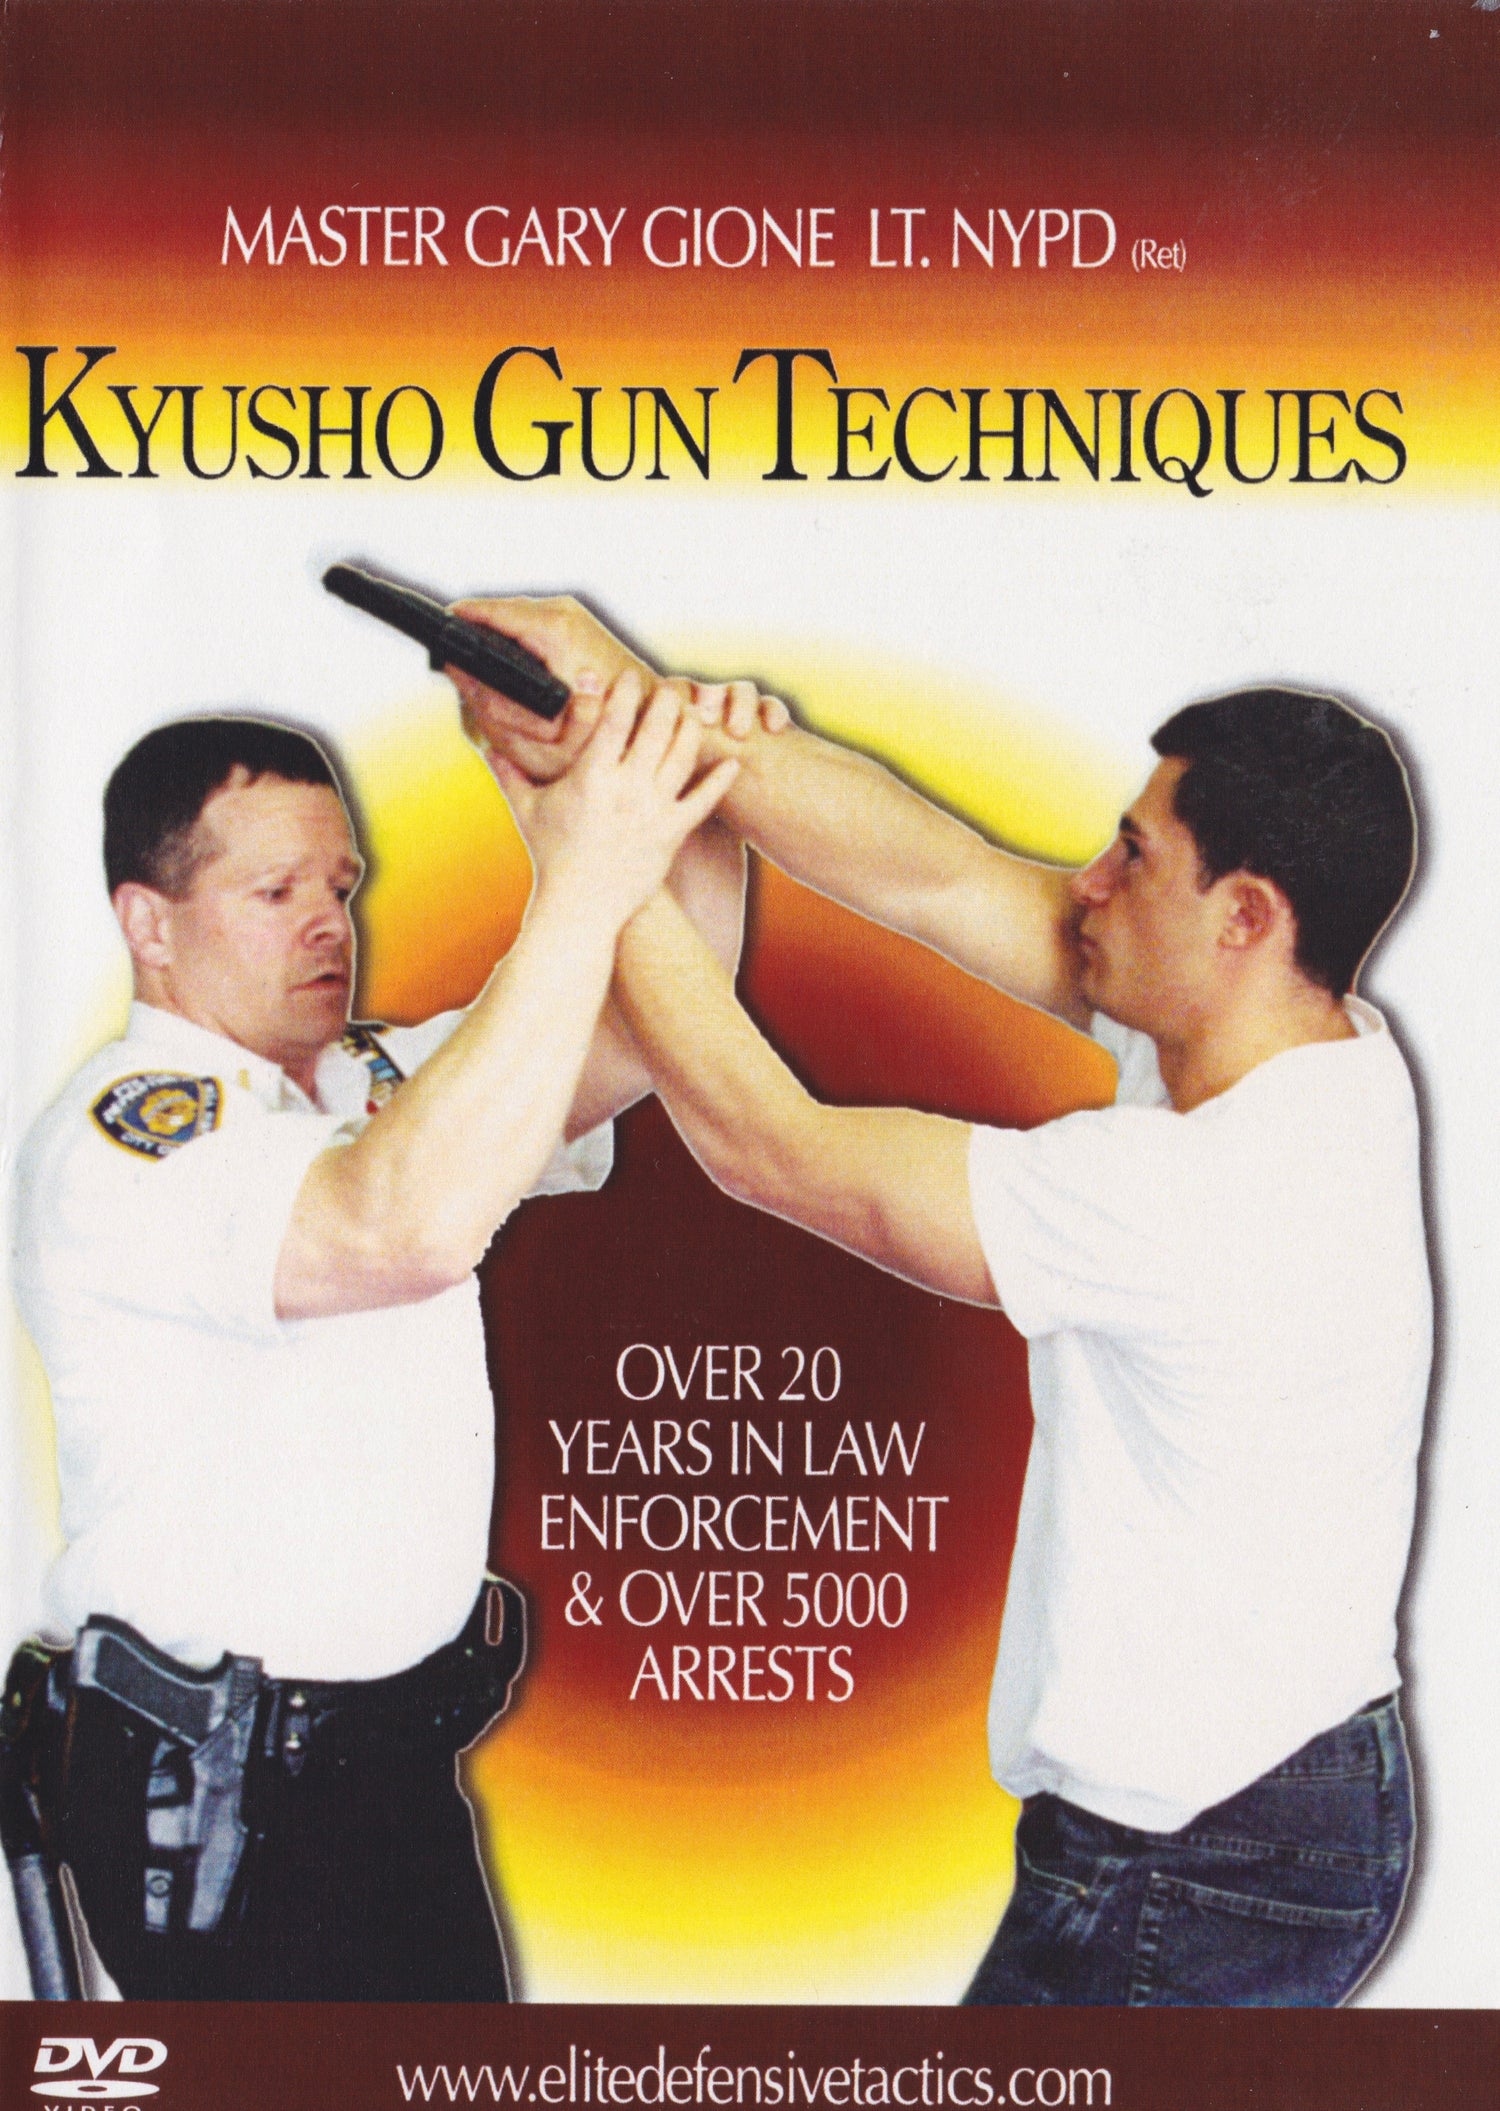 Kyusho Gun Techniques DVD by Gary Gione (Preowned)